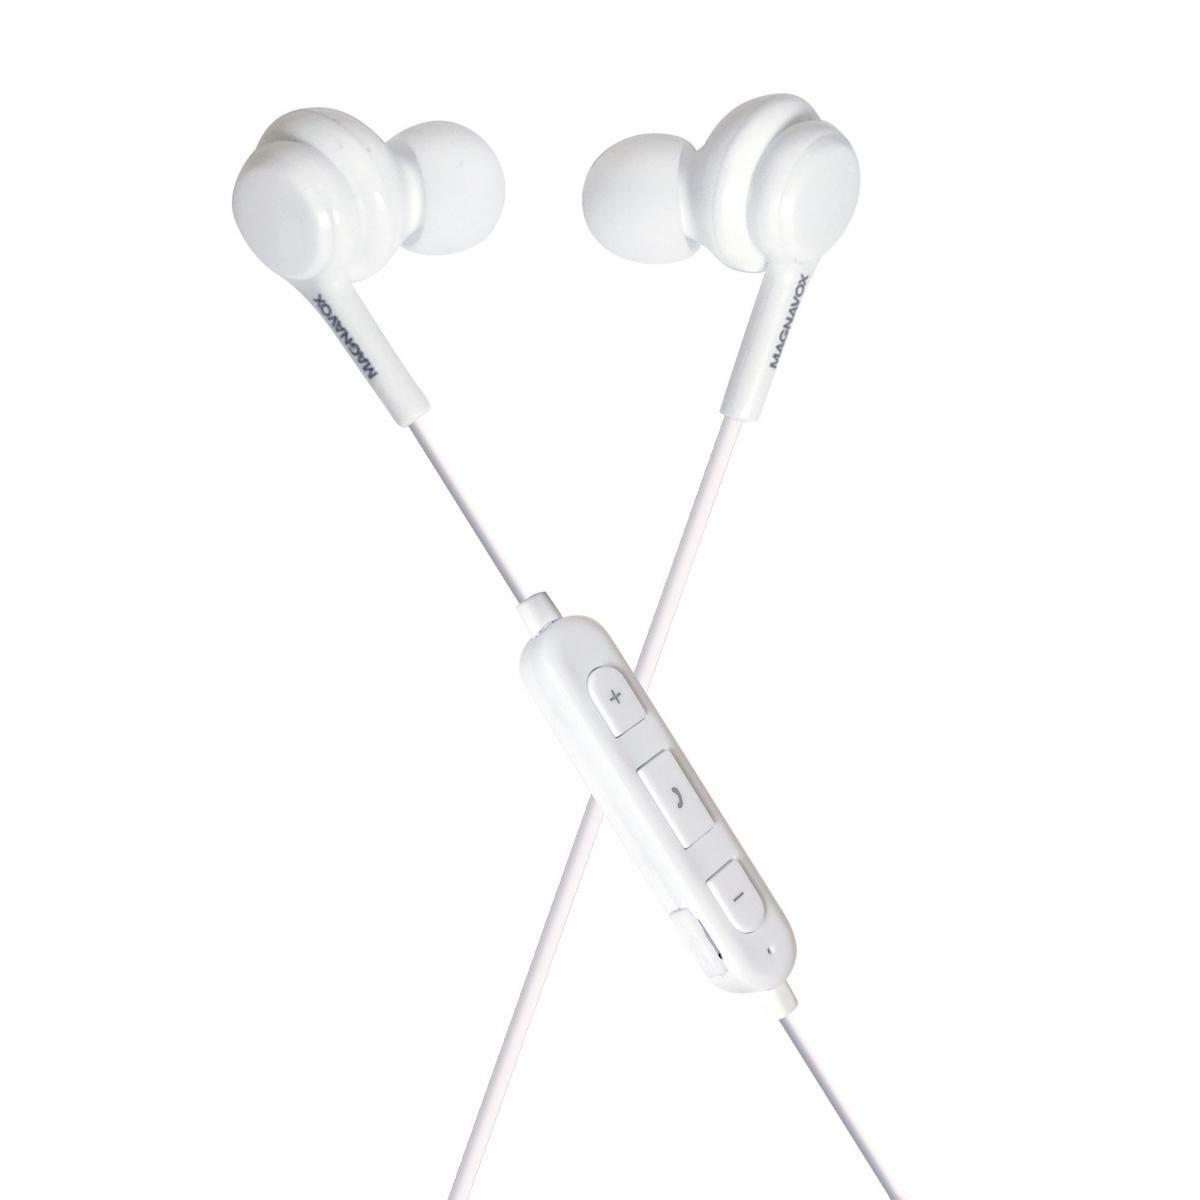 Magnavox MBH552-WH In-Ear Bluetooth Stereo Ear Buds with Microphone, White